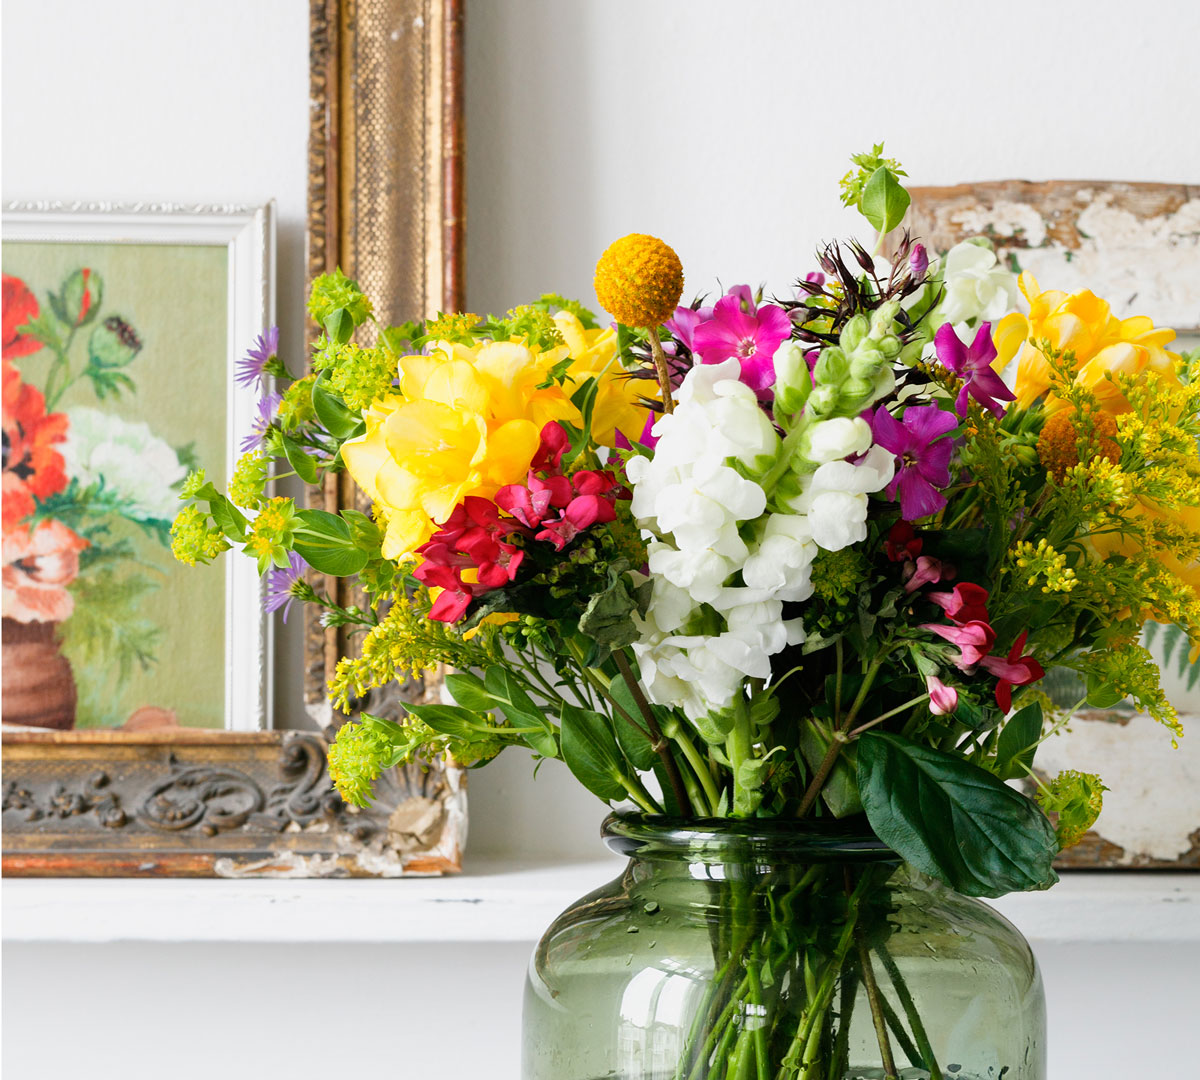 Win a three month Bloom & Wild subscription this Mothers Day